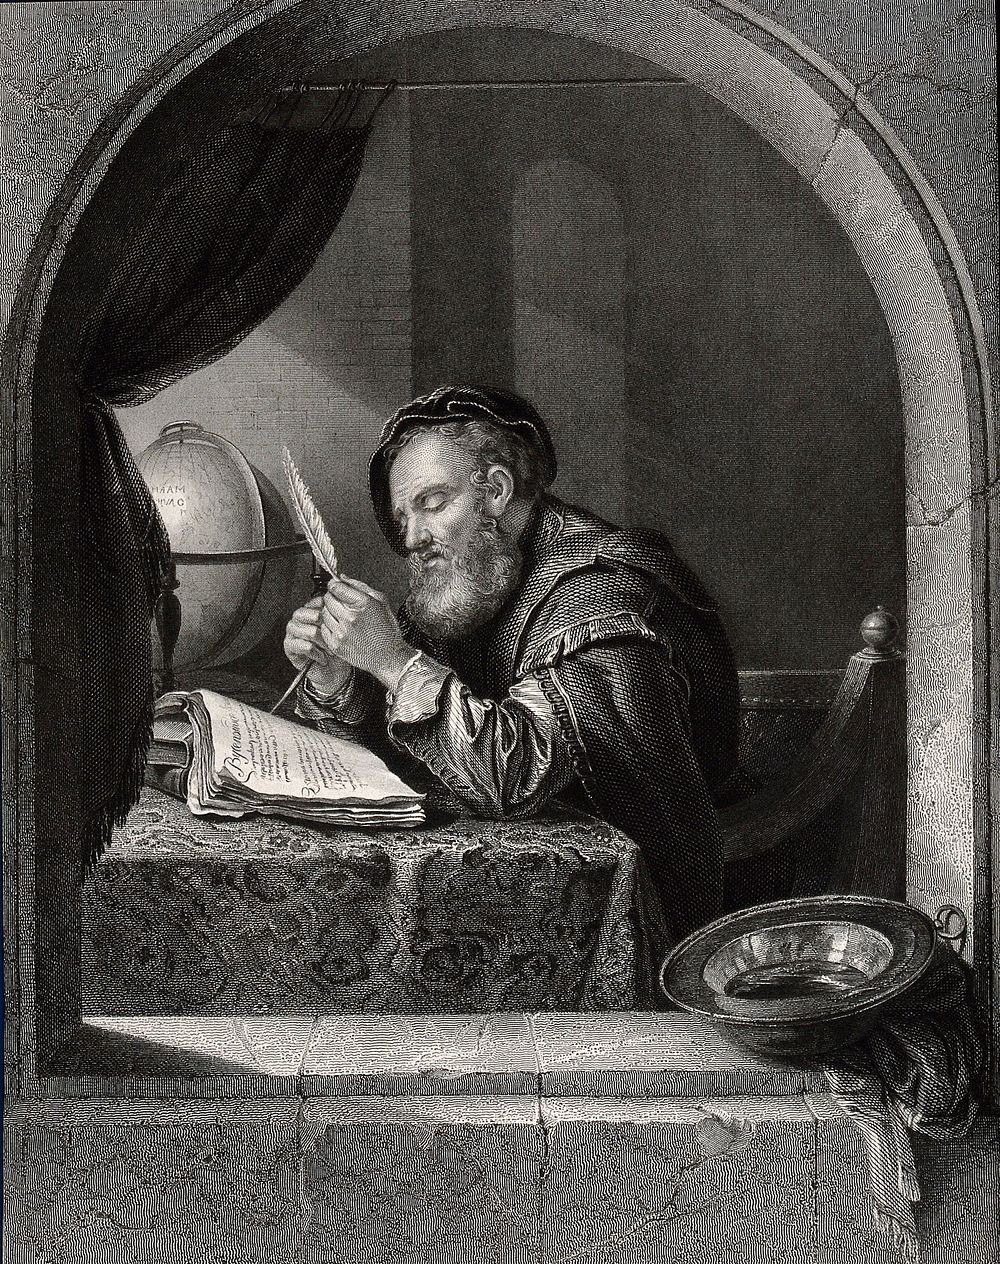 A seated man sharpening a quill pen. Engraving by R. Wallis after F. van Mieris.